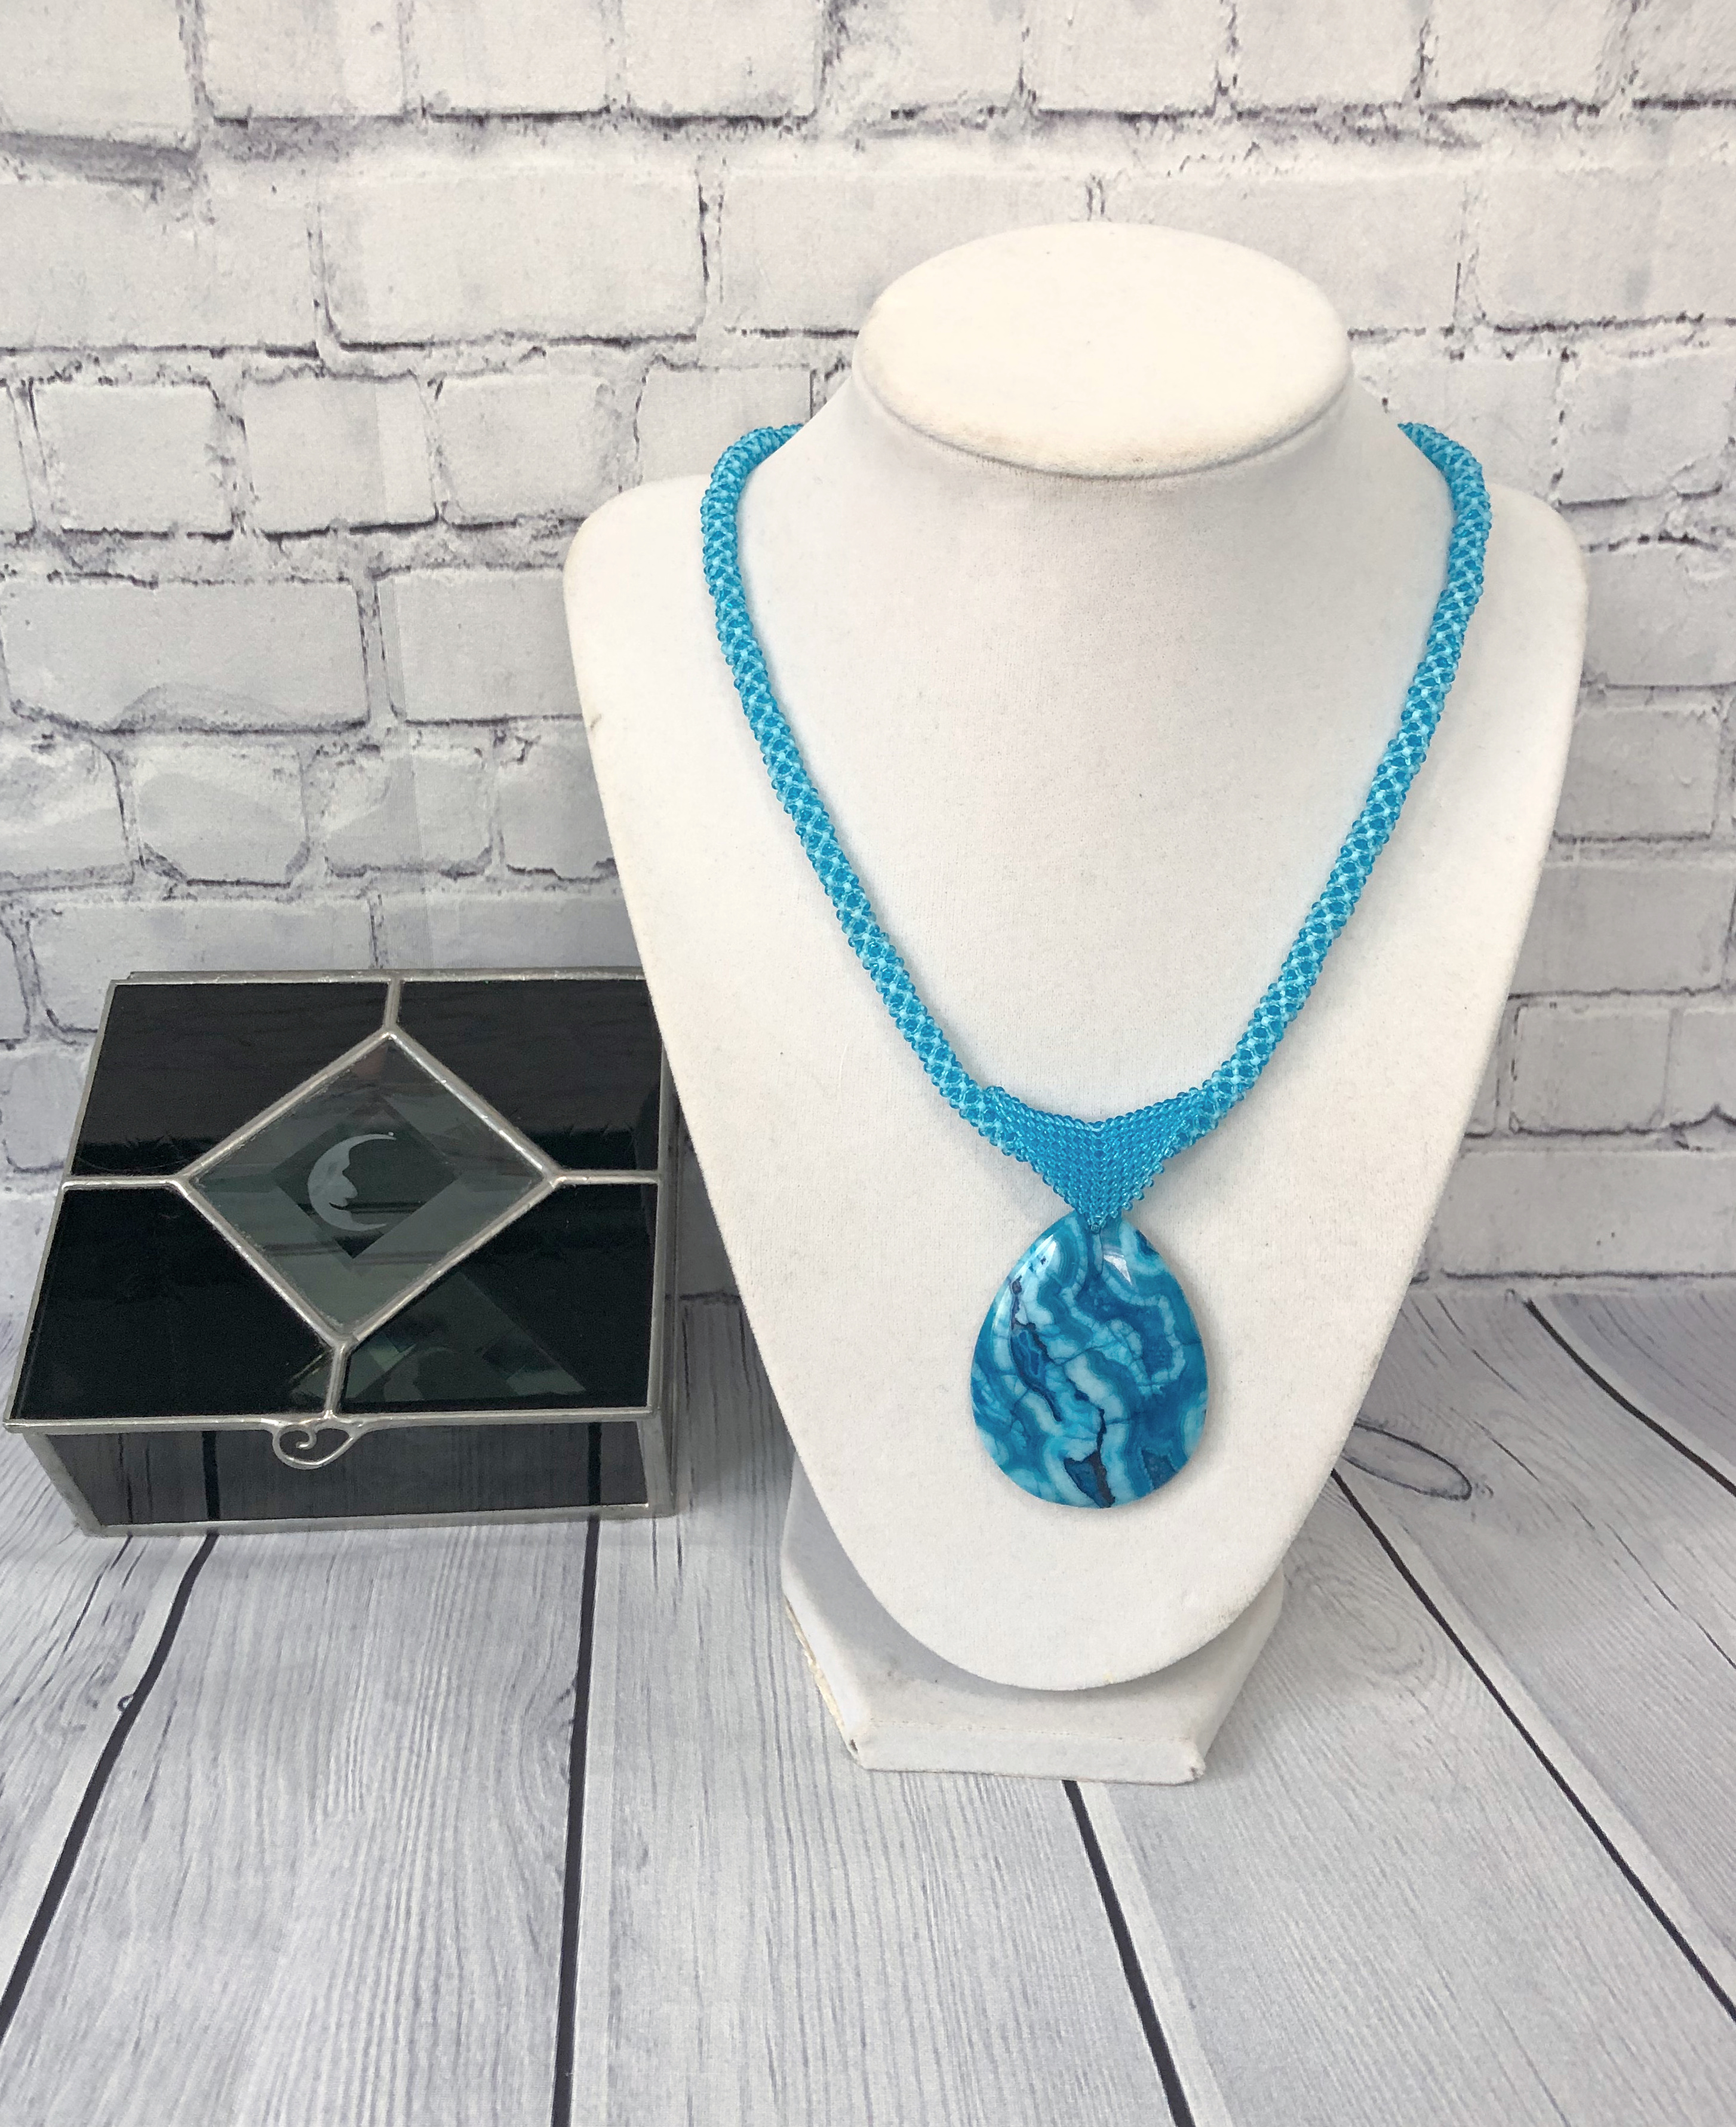 Beaded Necklace with Agate Pendant